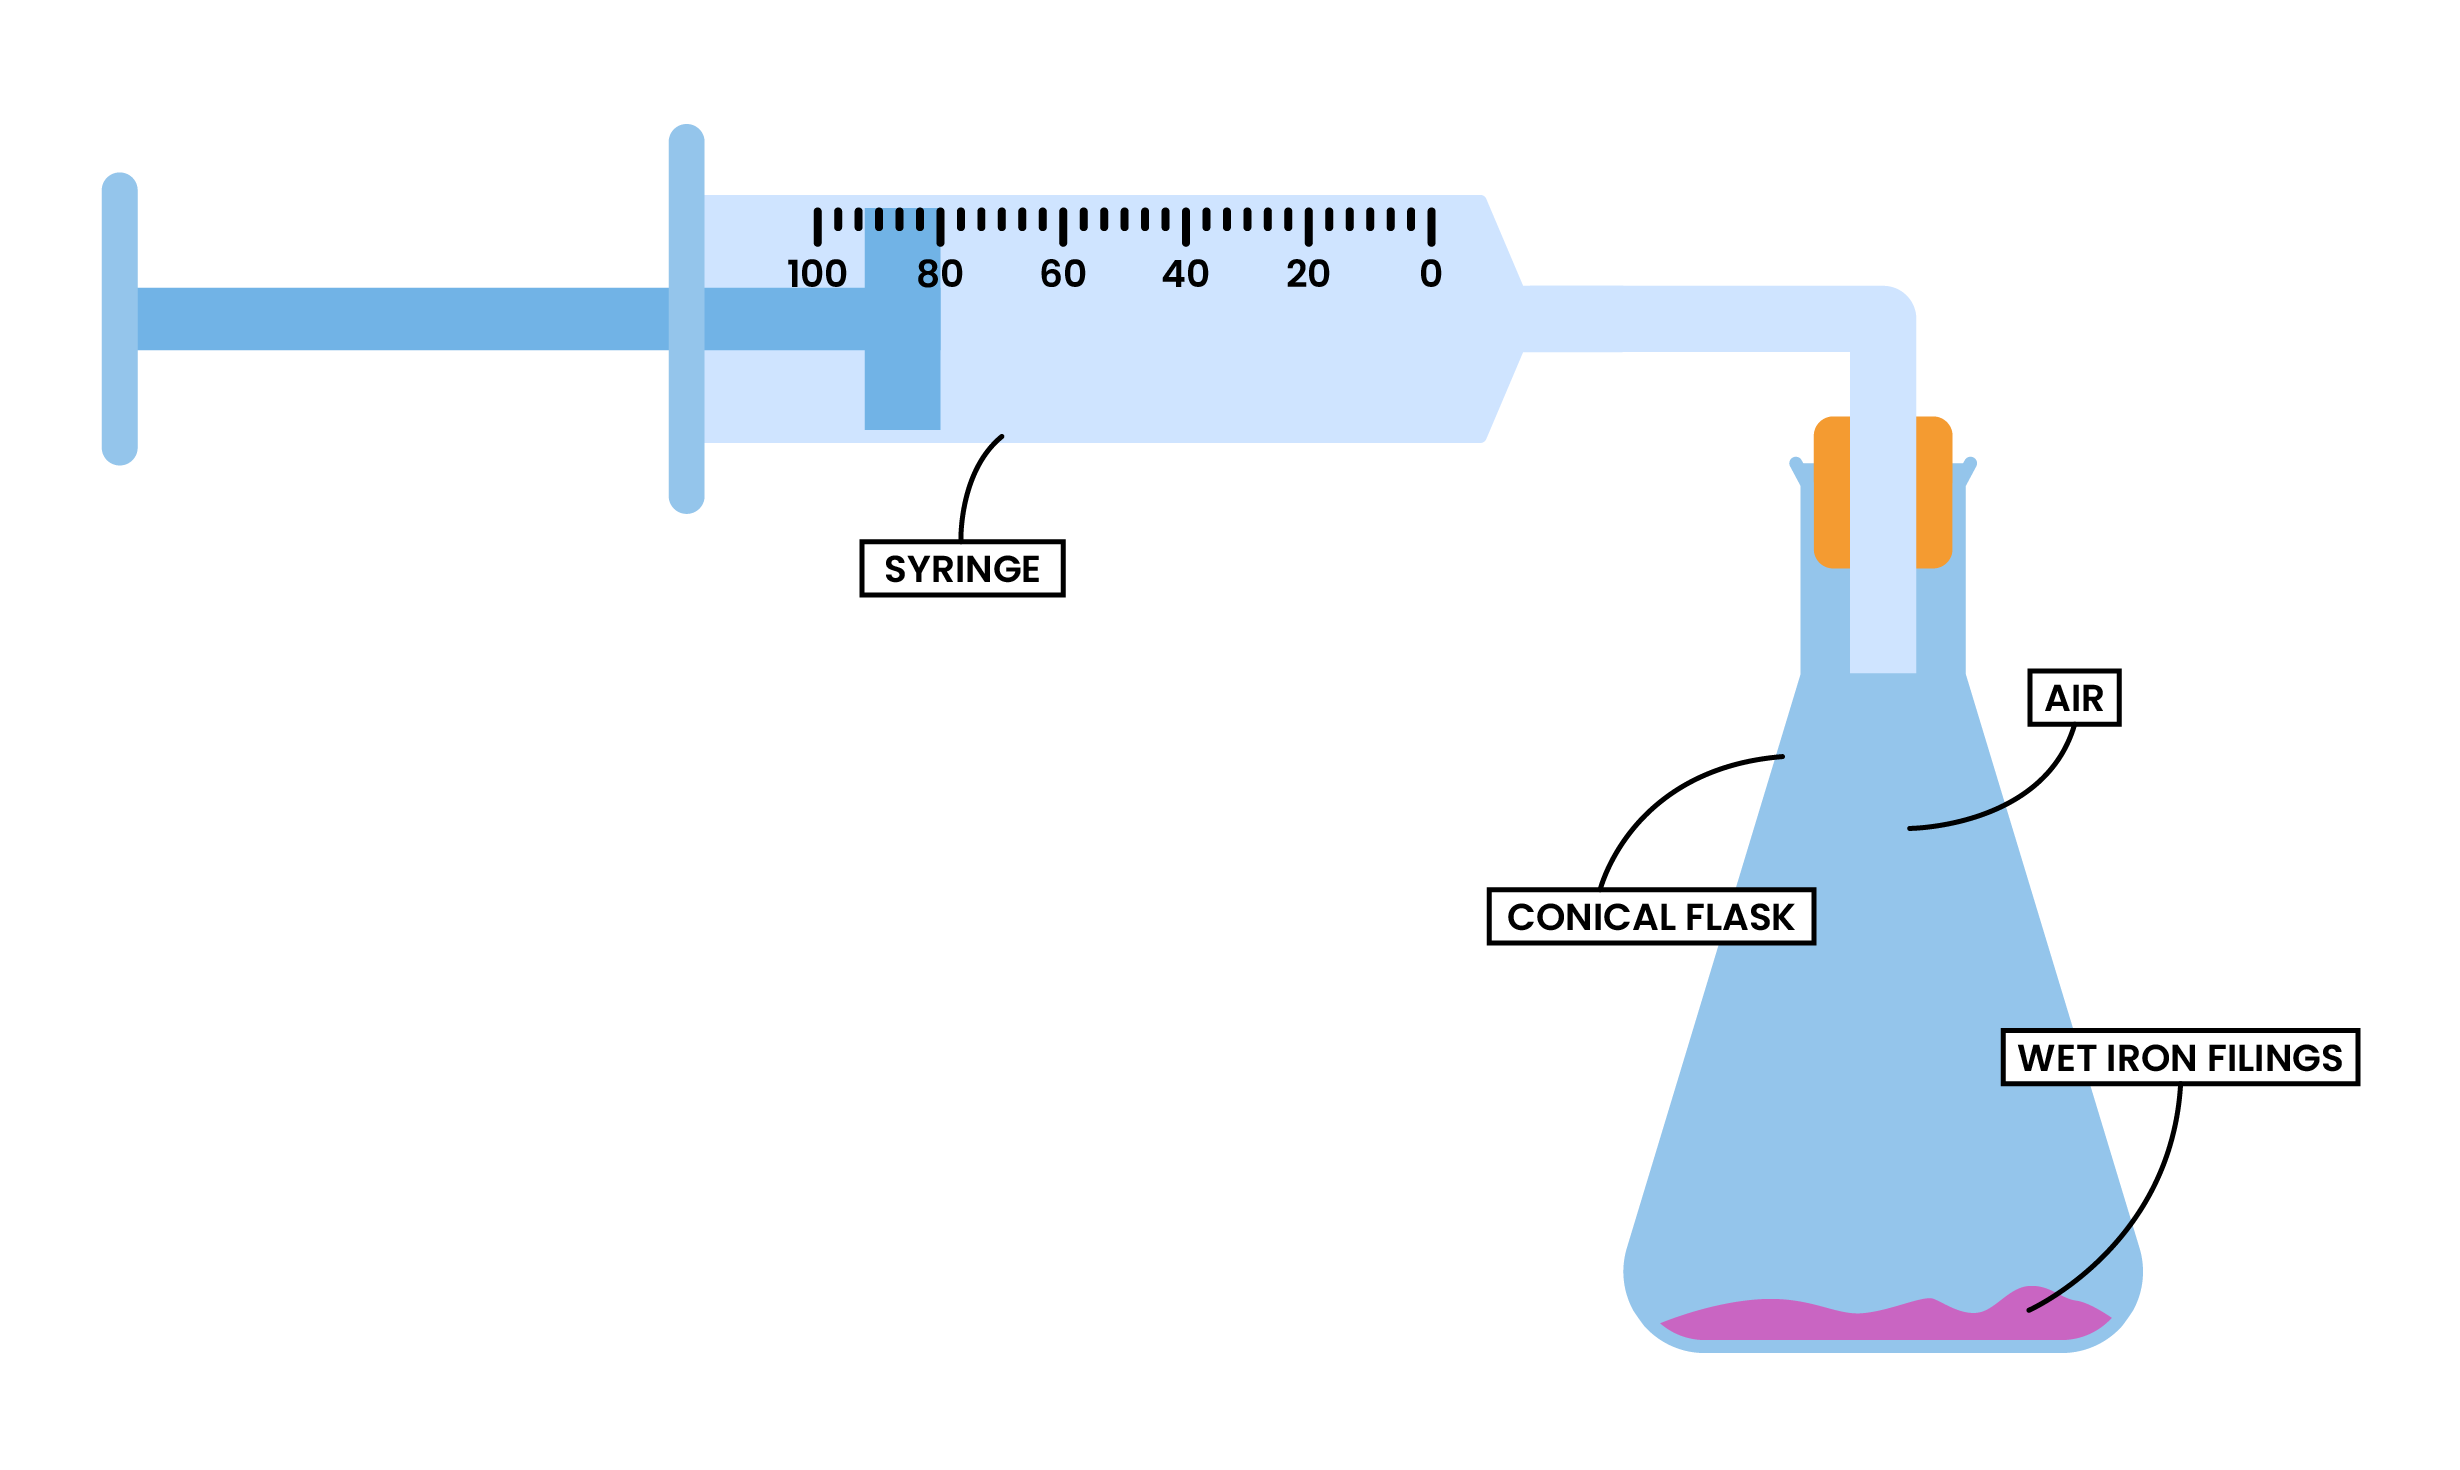 edexcel_igcse_chemistry_topic 12_gases in the atmosphere_005_experiment to determine percentage of oxygen in air with ion fillings reacting rust